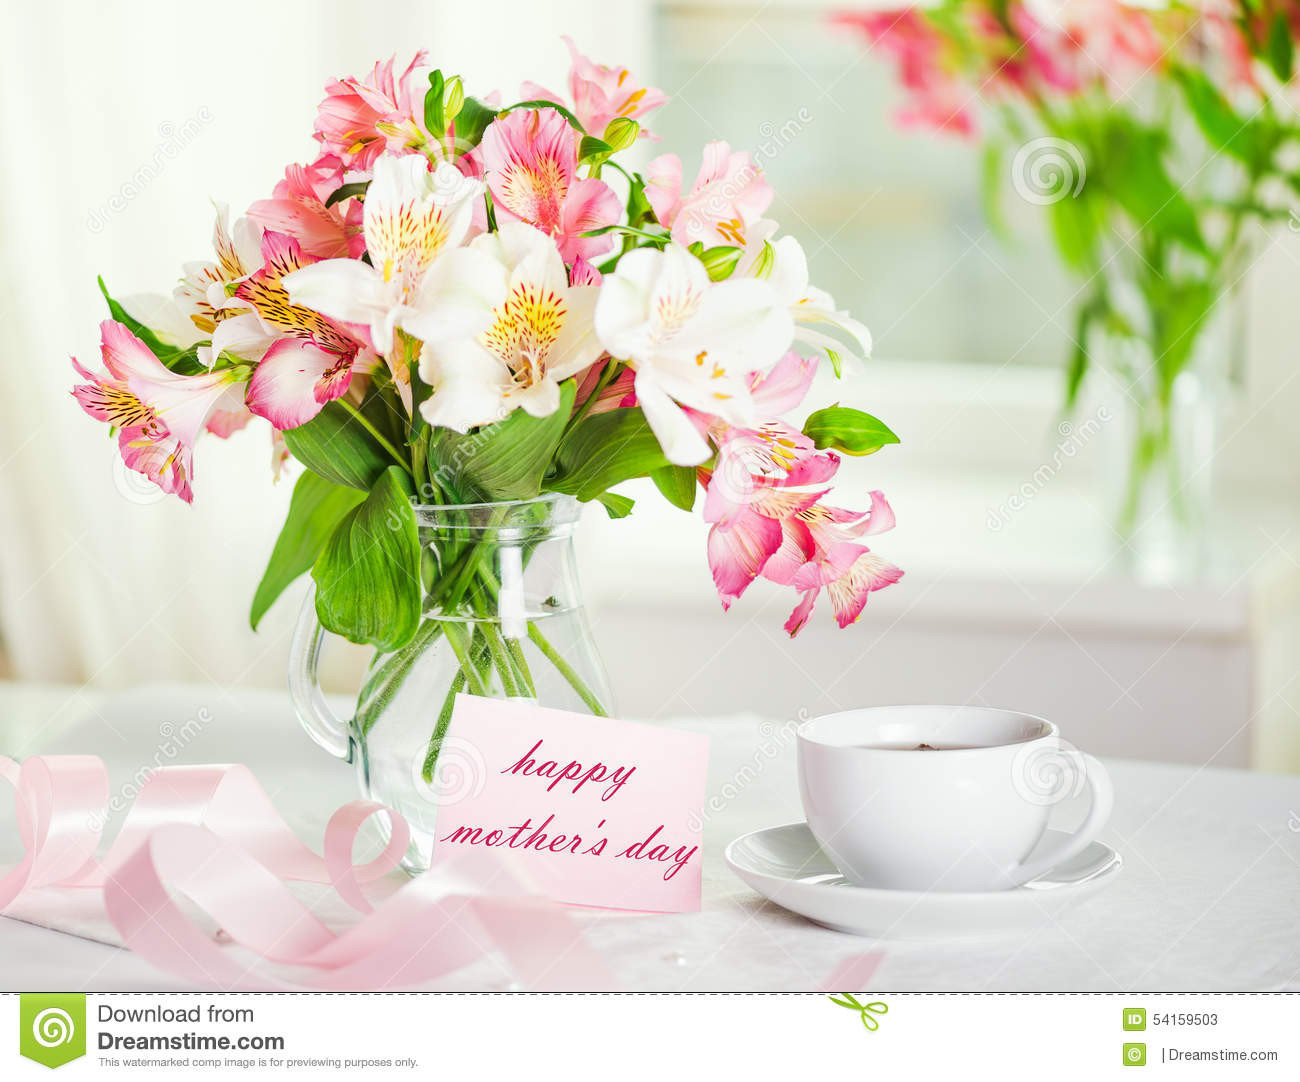 19 Awesome Artificial Flowers In Vase with Water 2024 free download artificial flowers in vase with water of beautiful bouquet of alstroemeria and cup of tea for mothers da pertaining to beautiful bouquet of alstroemeria in a vase with water white cup of tea